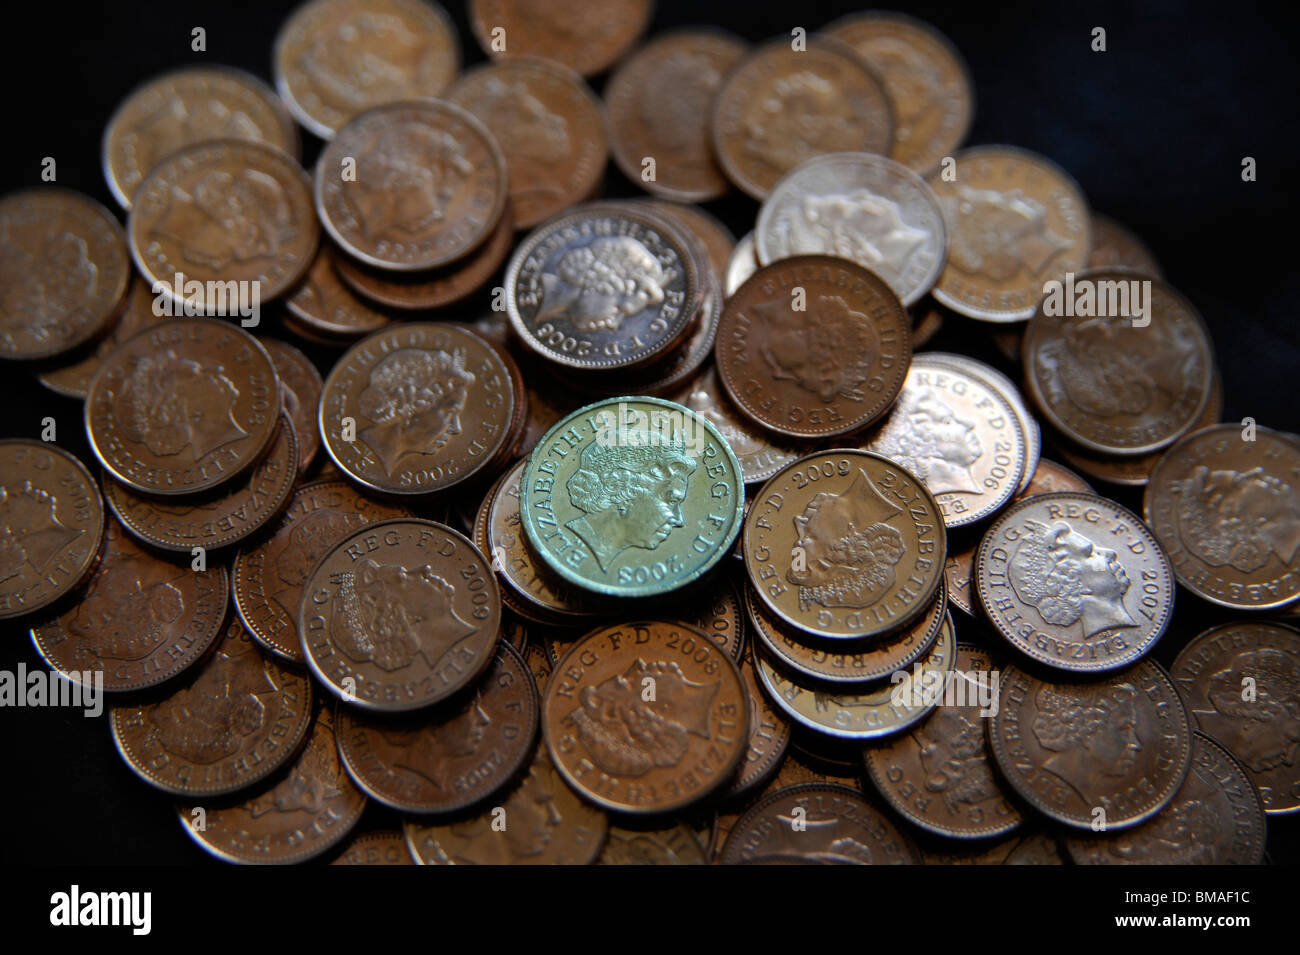 Pound coin with pennies. Stock Photo